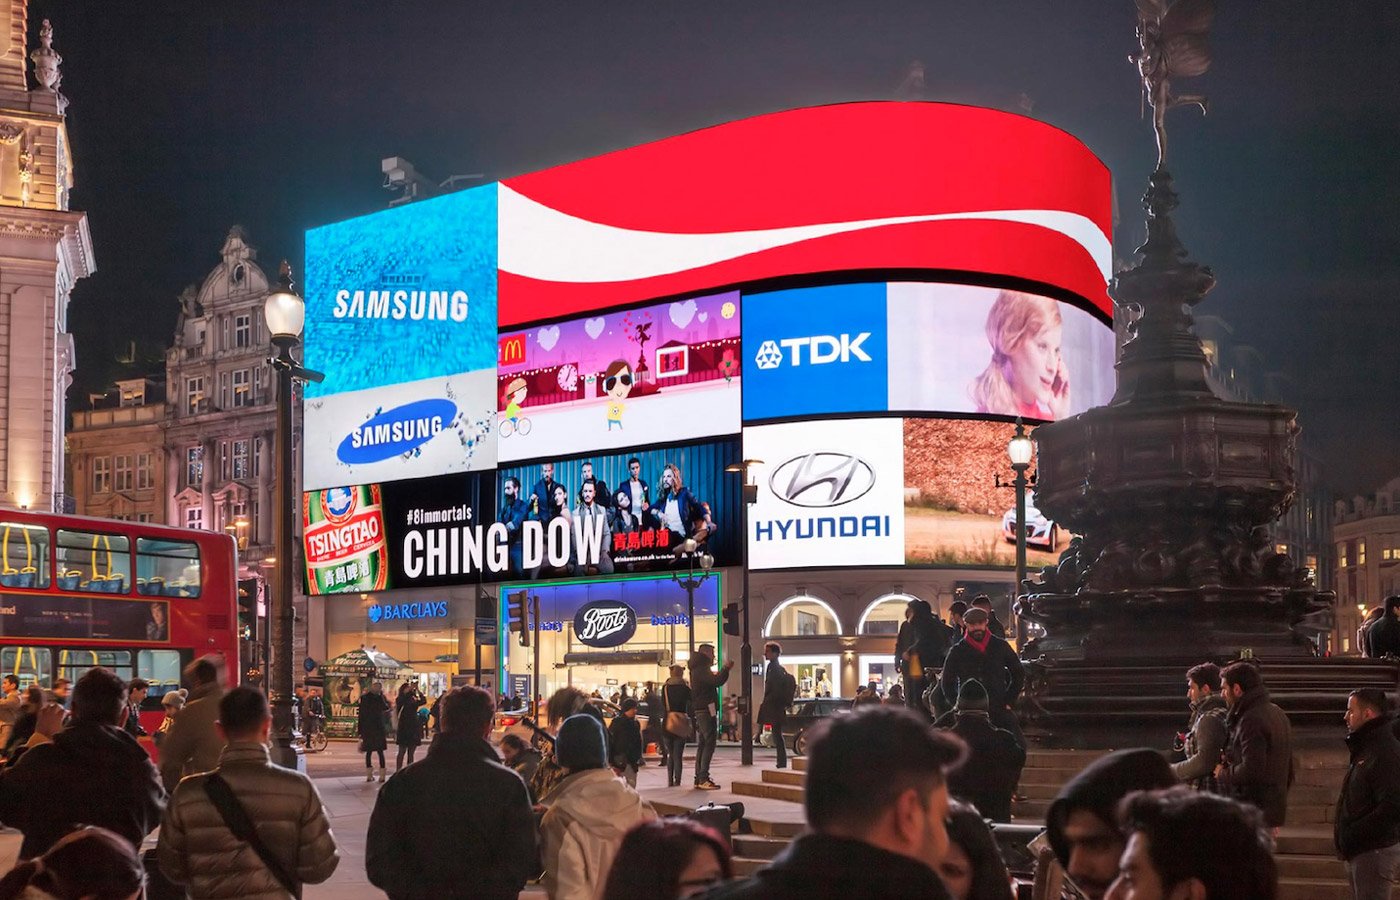 The ad in Piccadilly Circus